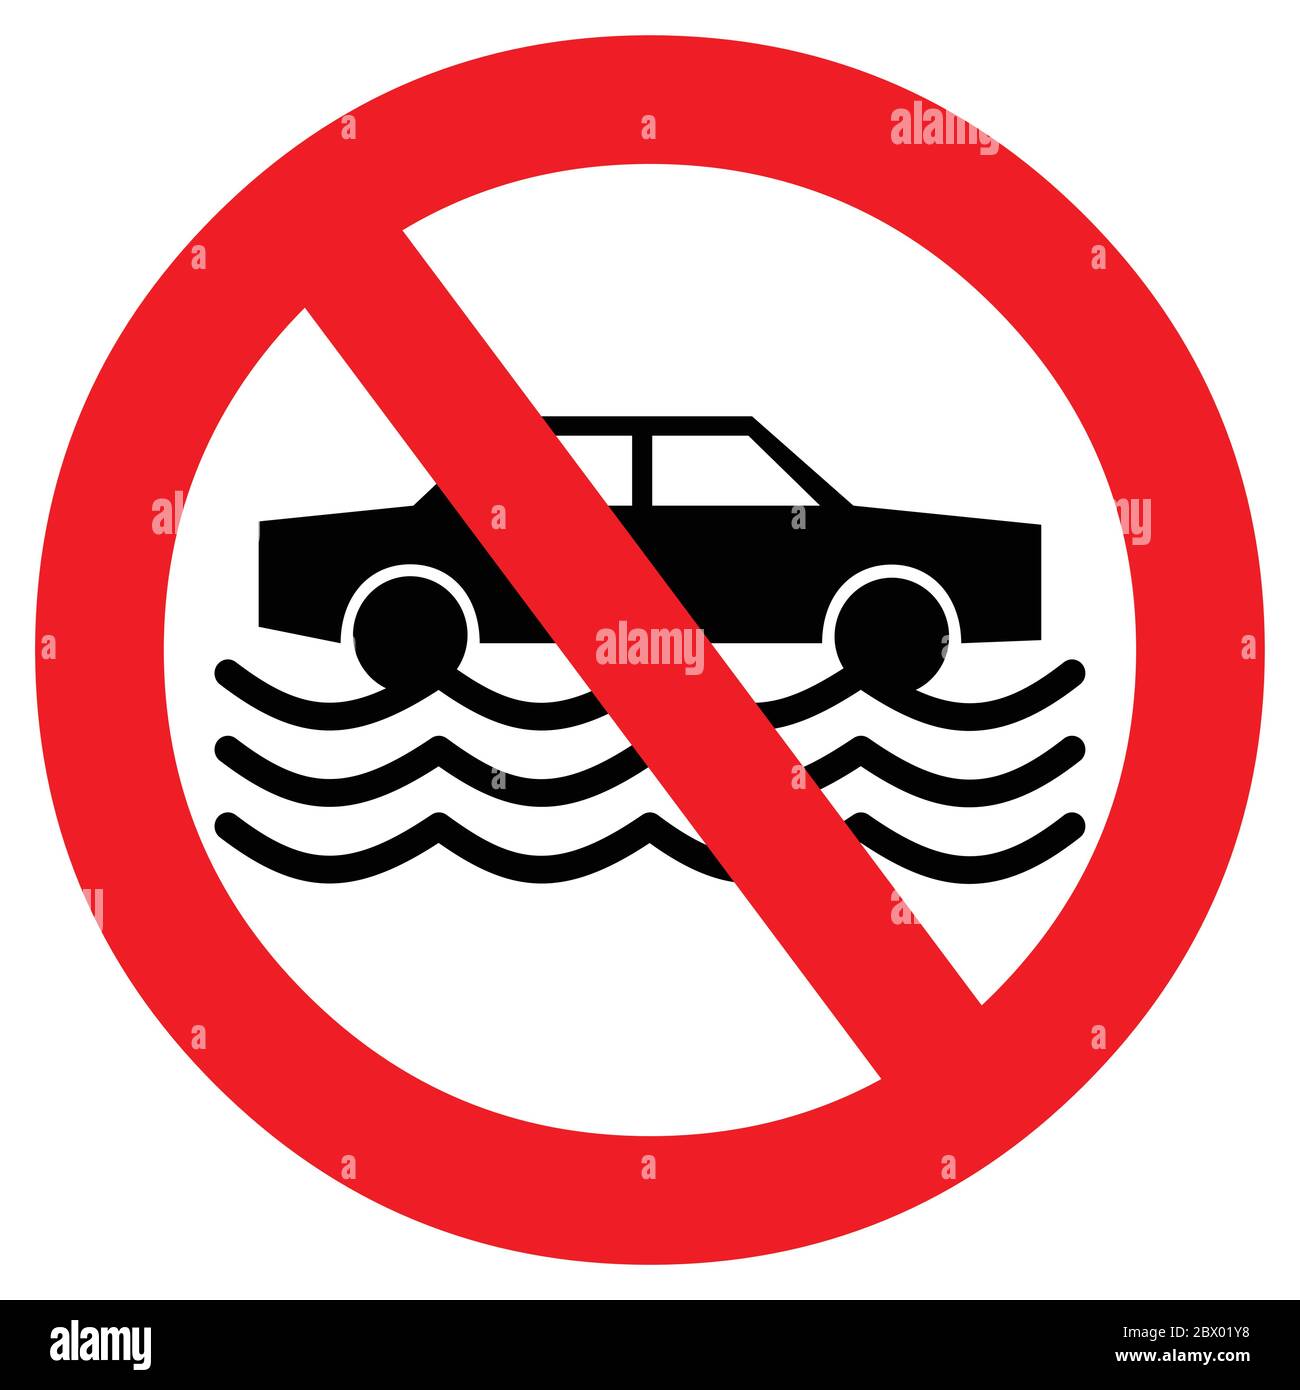 No Driving in Flood Water- An Illustration of a No Driving in Flood Water Warning. Stock Vector